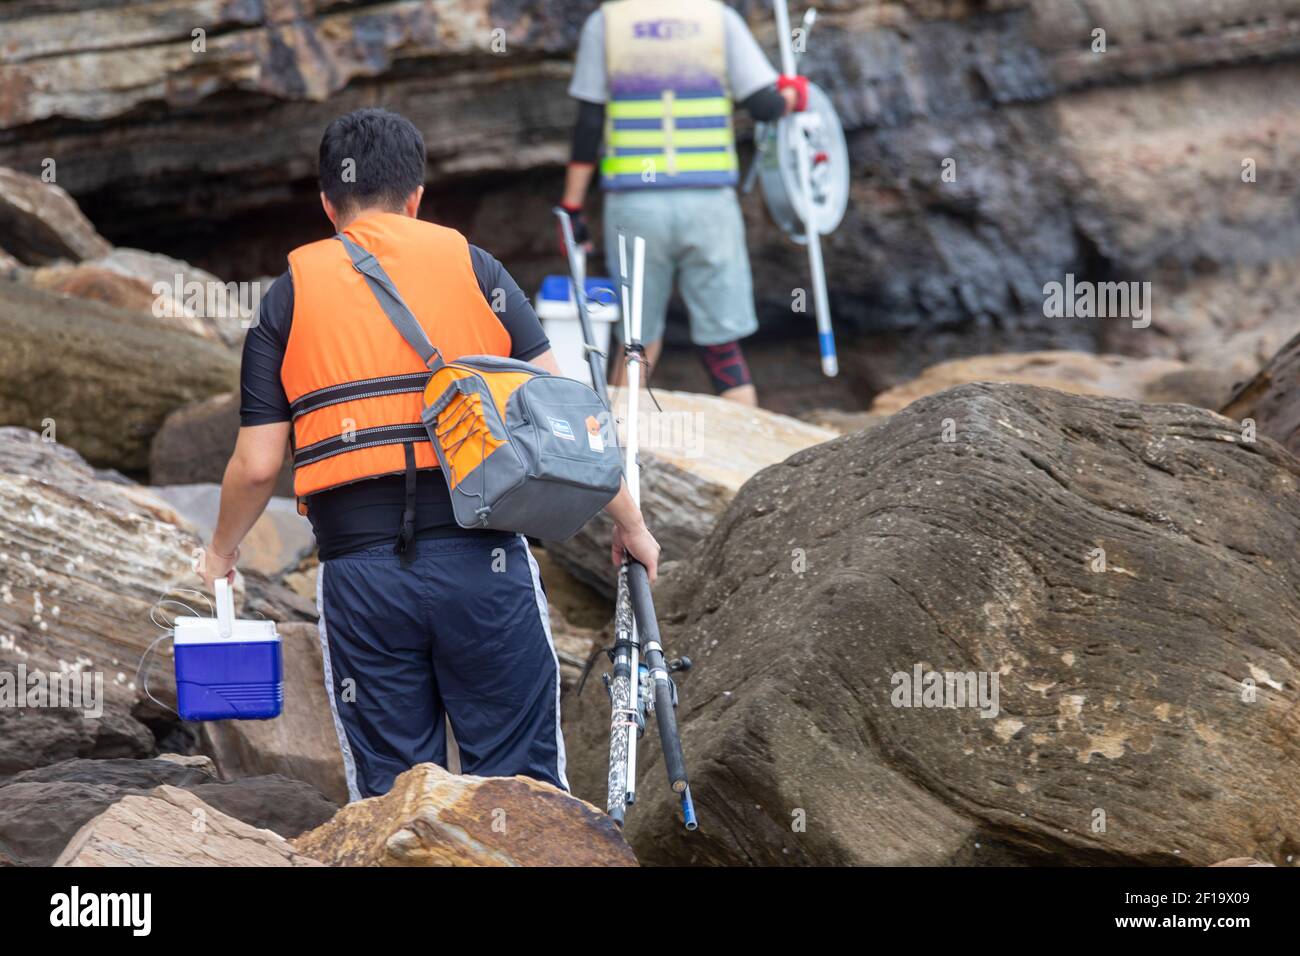 Two asian men with fishing equipment and rods head over the rocks to a fishing spot in Sydney,Australia Stock Photo